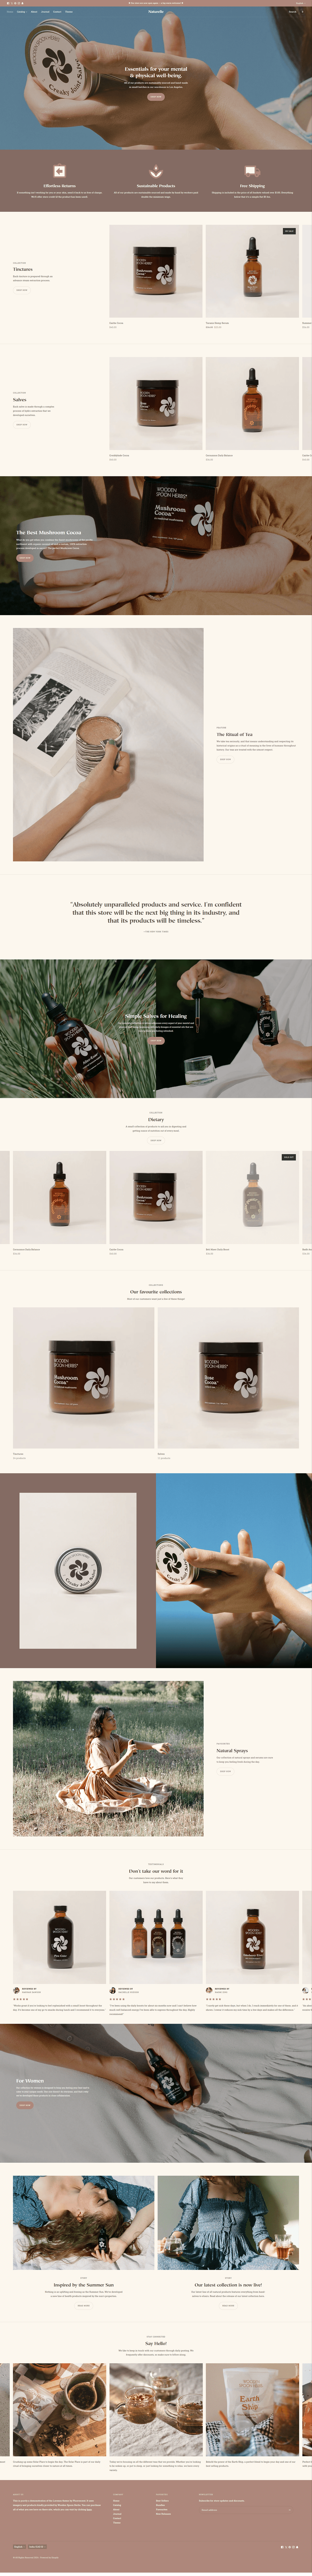 I designed this Shopify e-commerce store/website for one of my client and today.